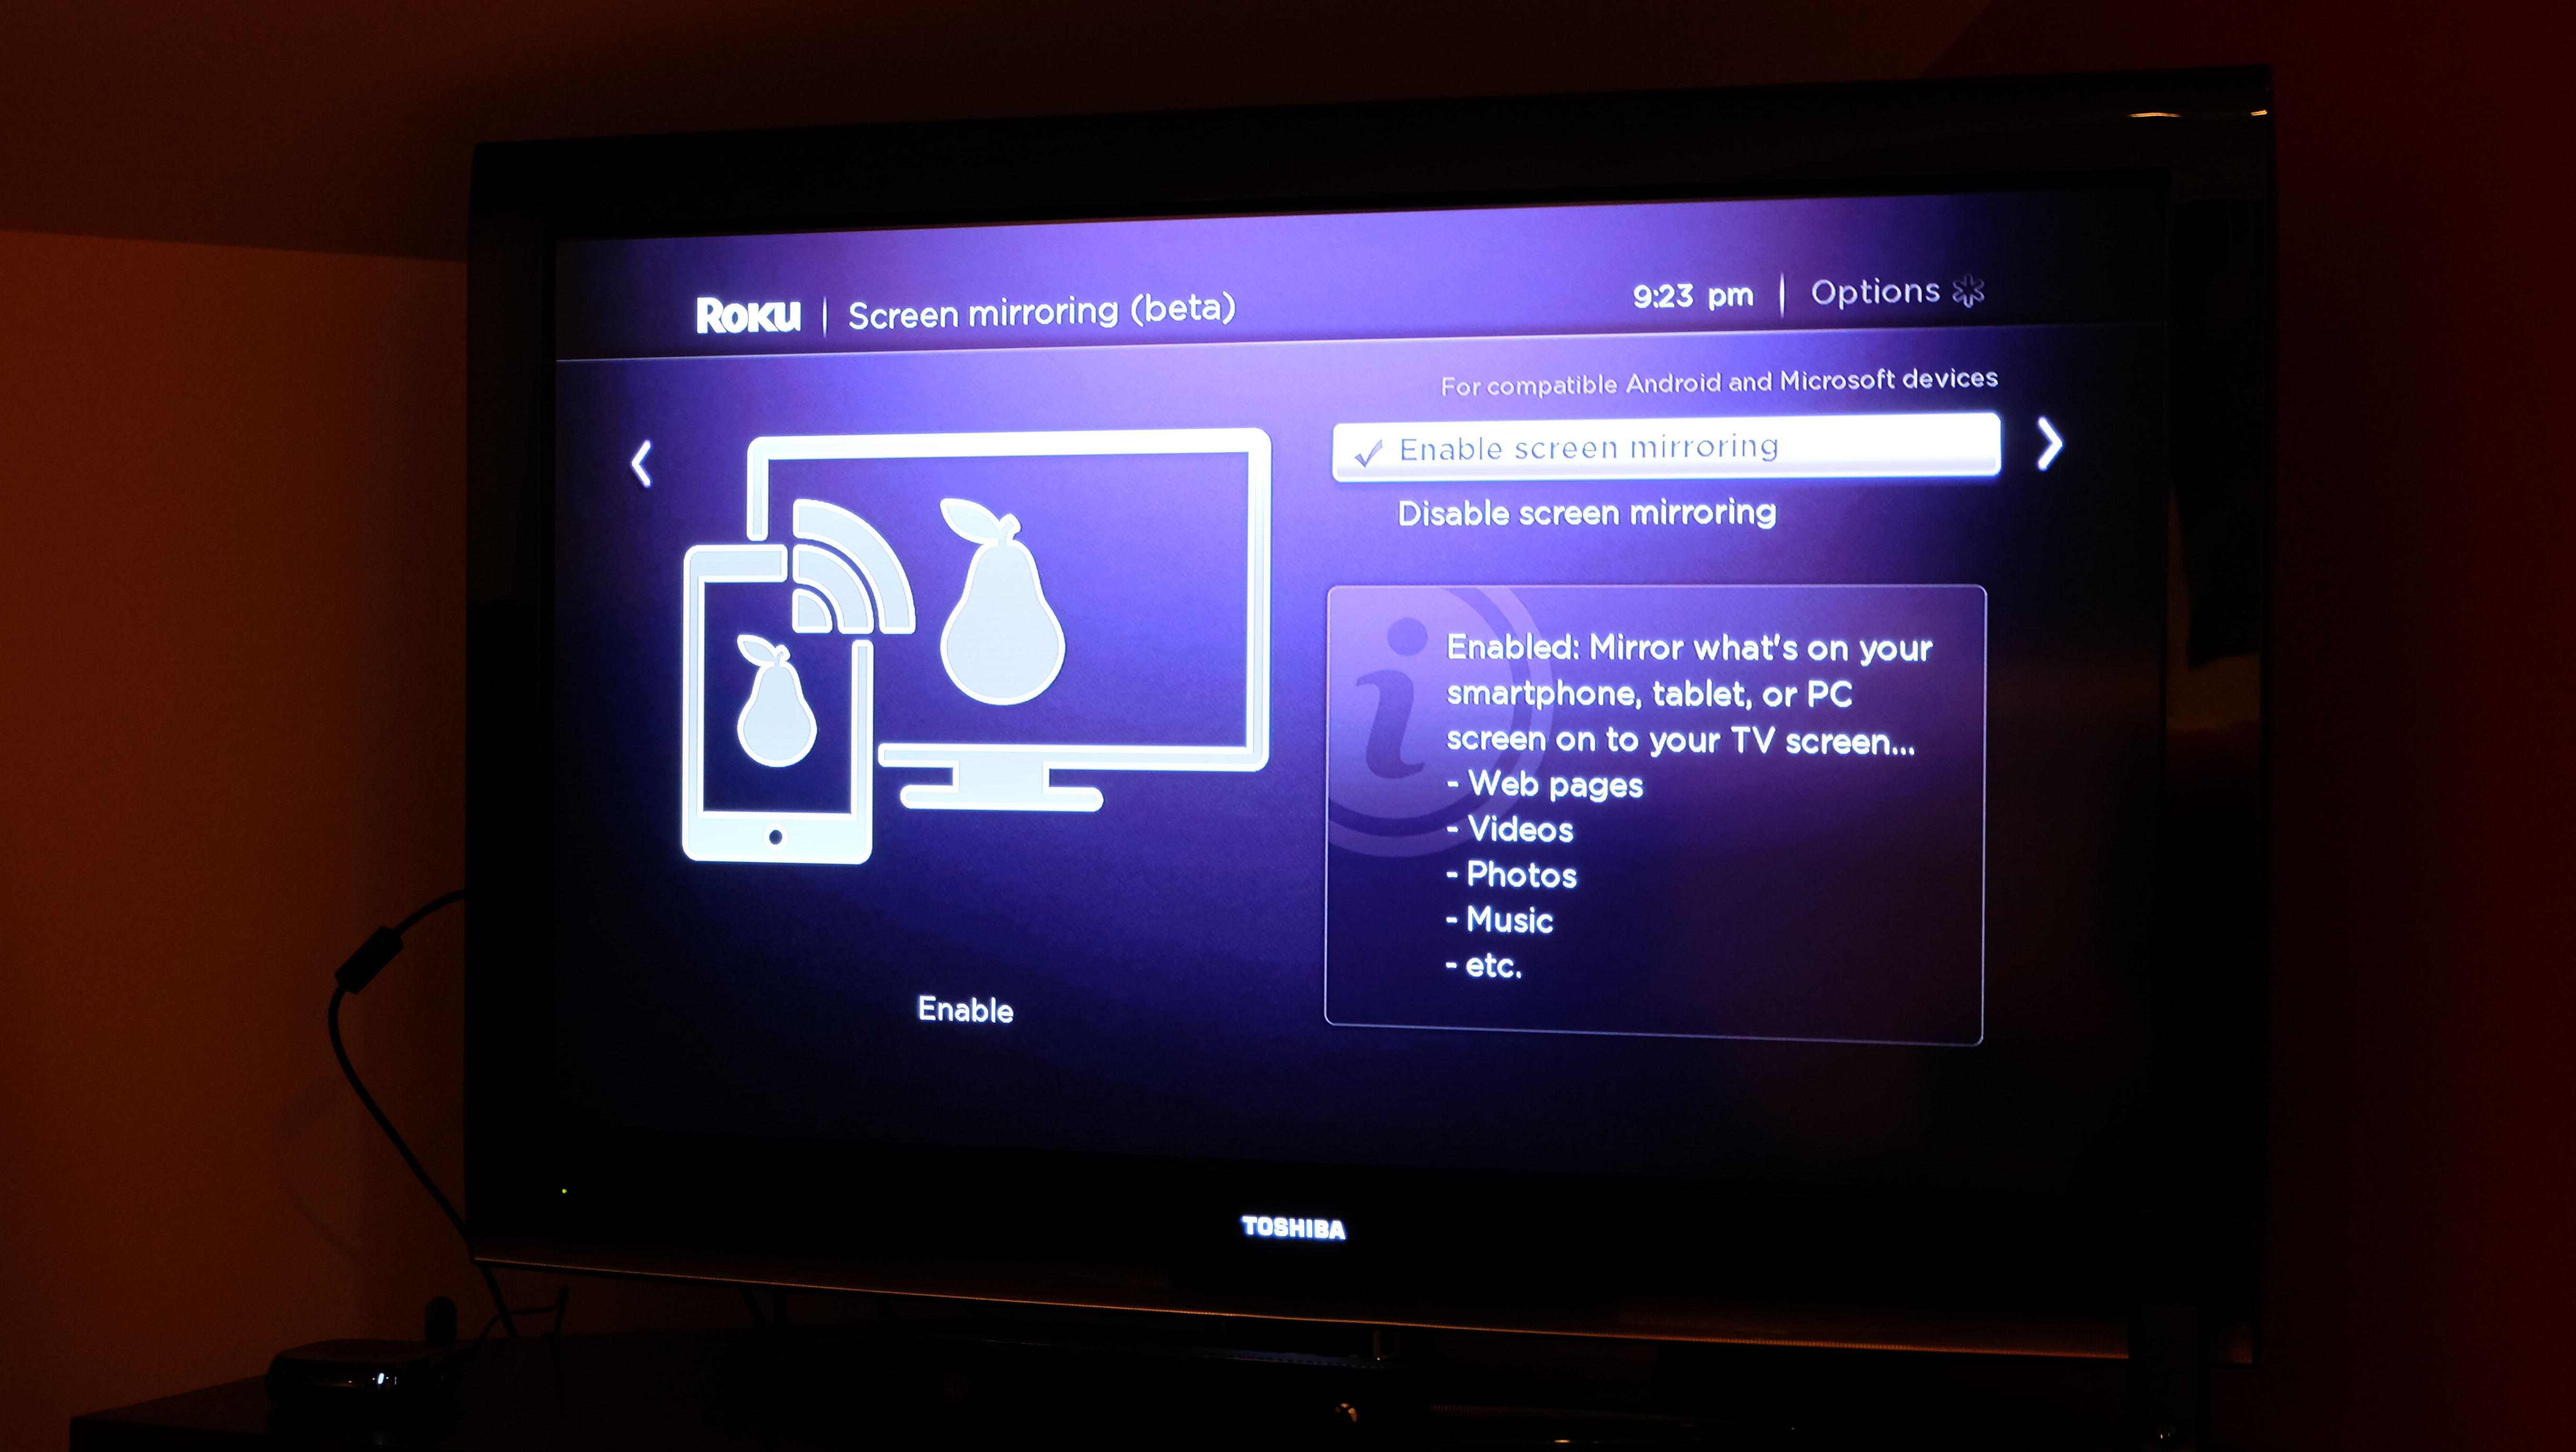 praktiserende læge legering dominere Roku rolls out screen mirroring beta for Windows 8.1 and Windows Phone 8.1  devices | Windows Experience Blog